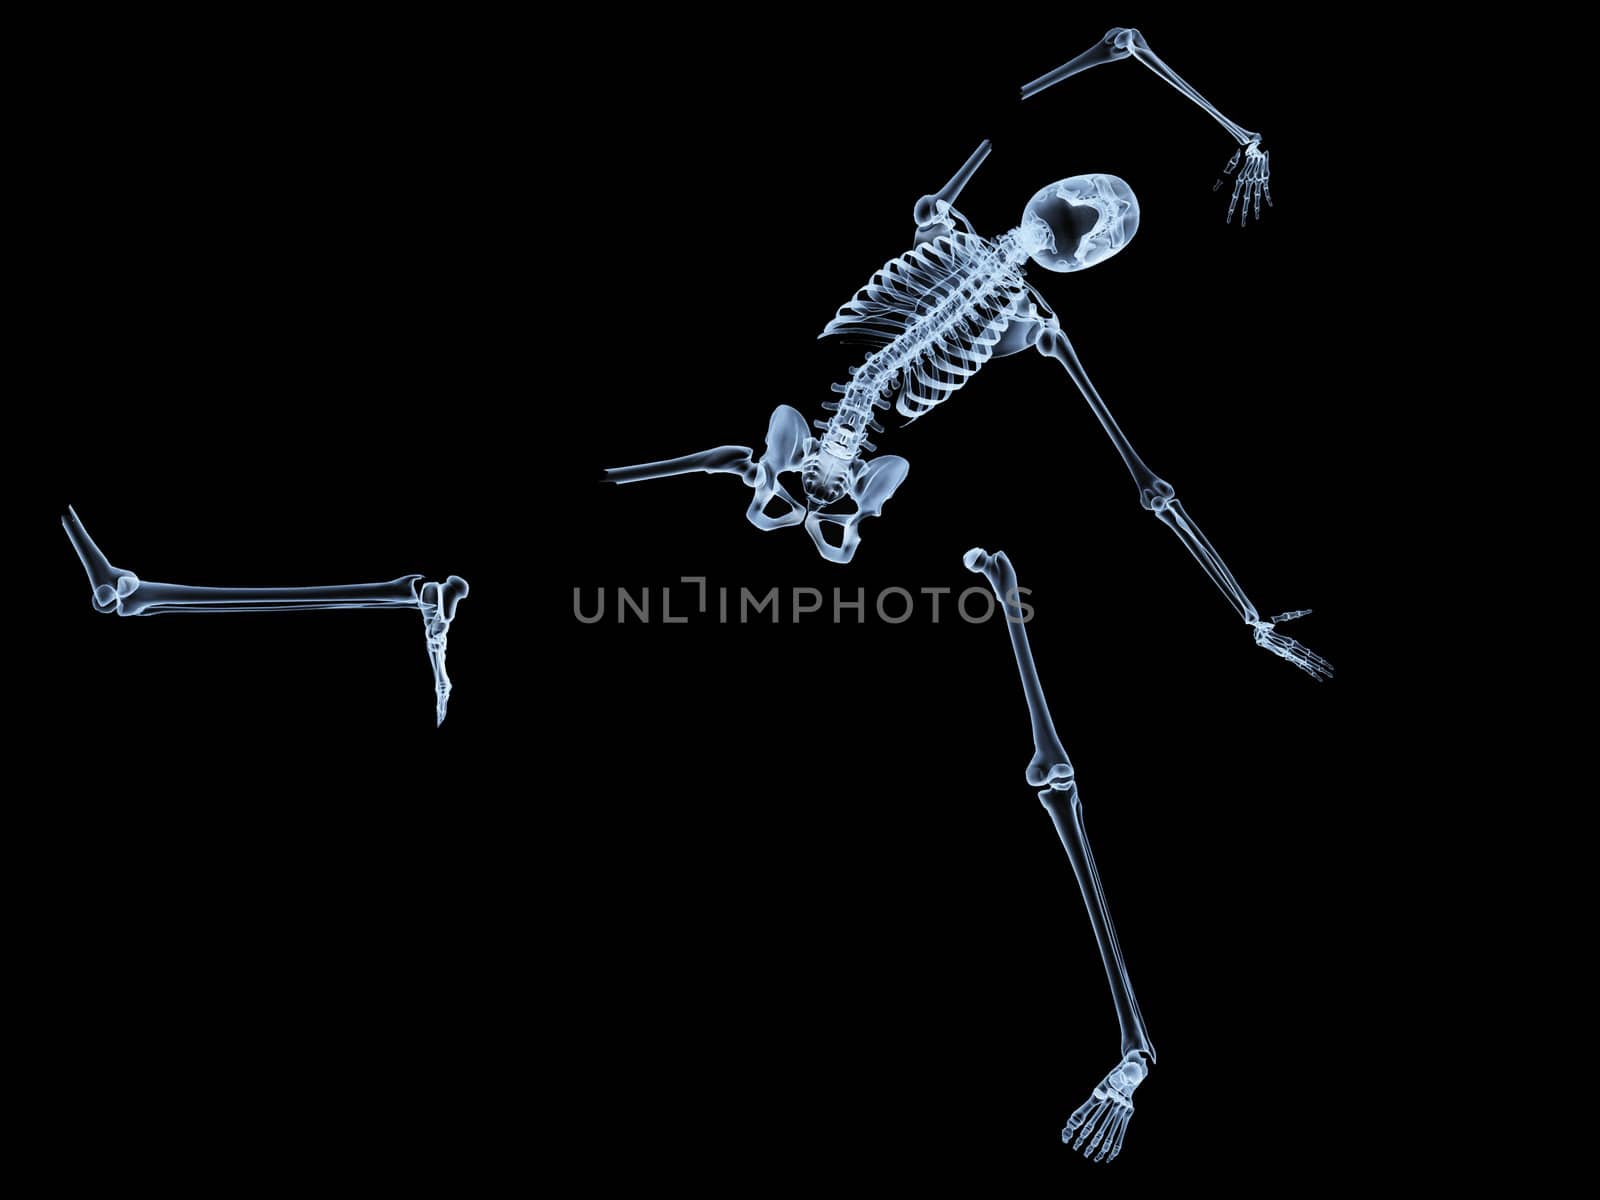 X rayed skeleton that is broken and shattered.